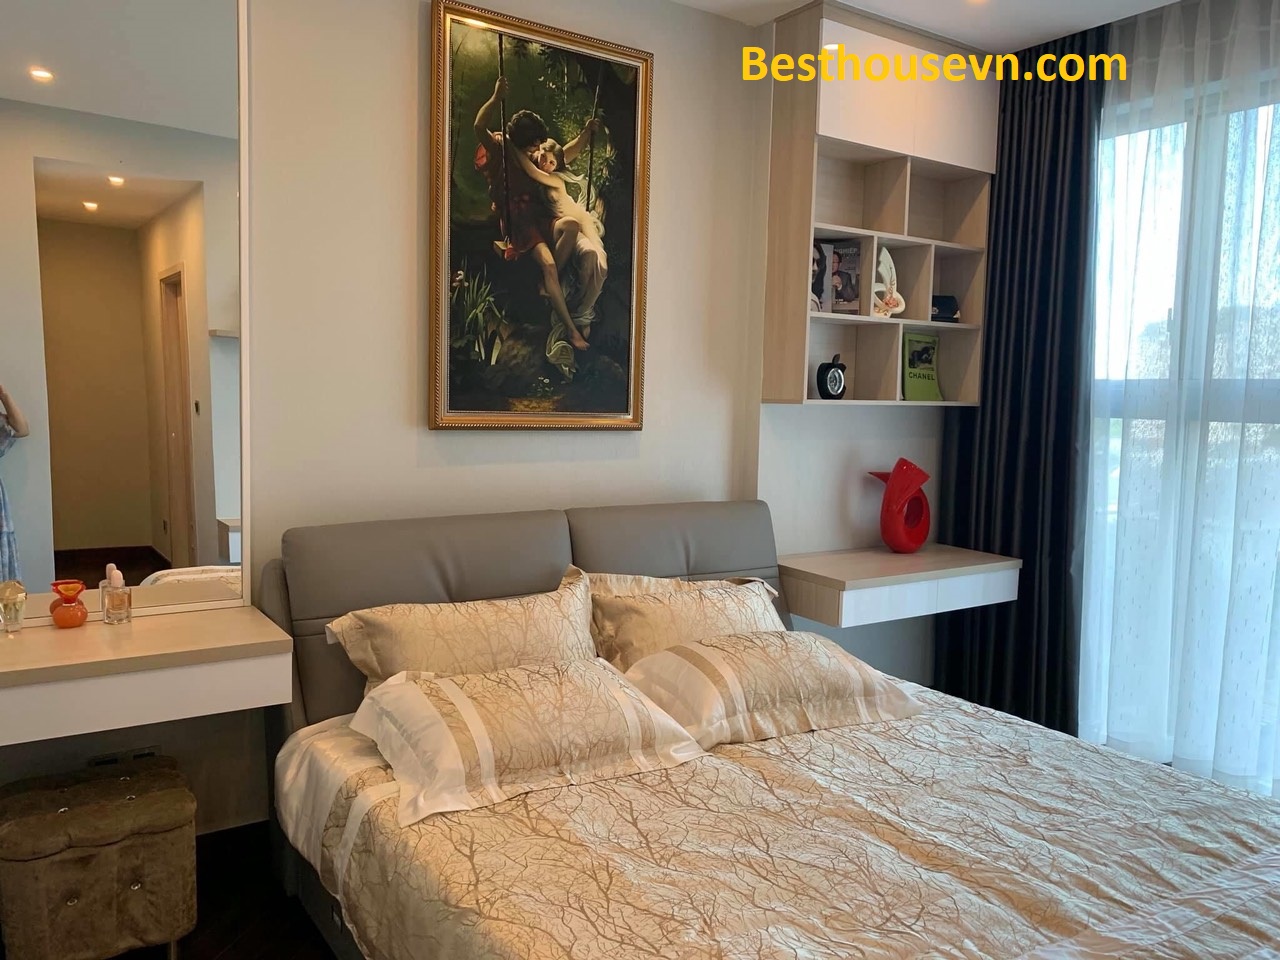 Mitown-89sqm-apartment-for-rent-in-phu-my-hung-district-7-hcmc-7